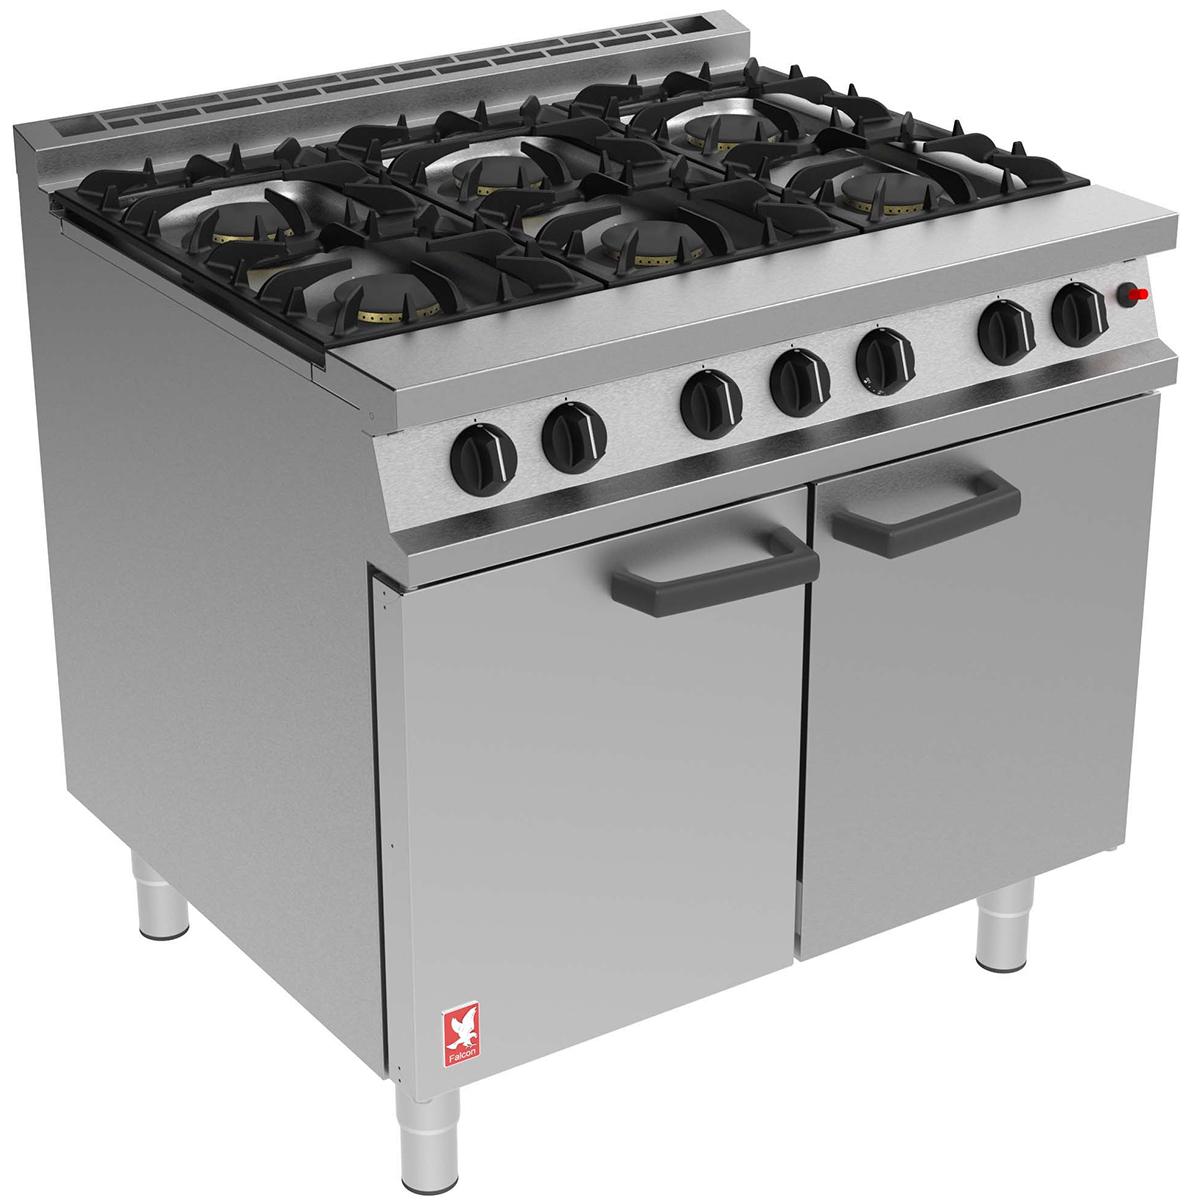 FALCON 6 BURNER GAS COOKER DOUBLE PAN HOB SUPPORT NEW DOMINATOR RANGE OVEN G2101 